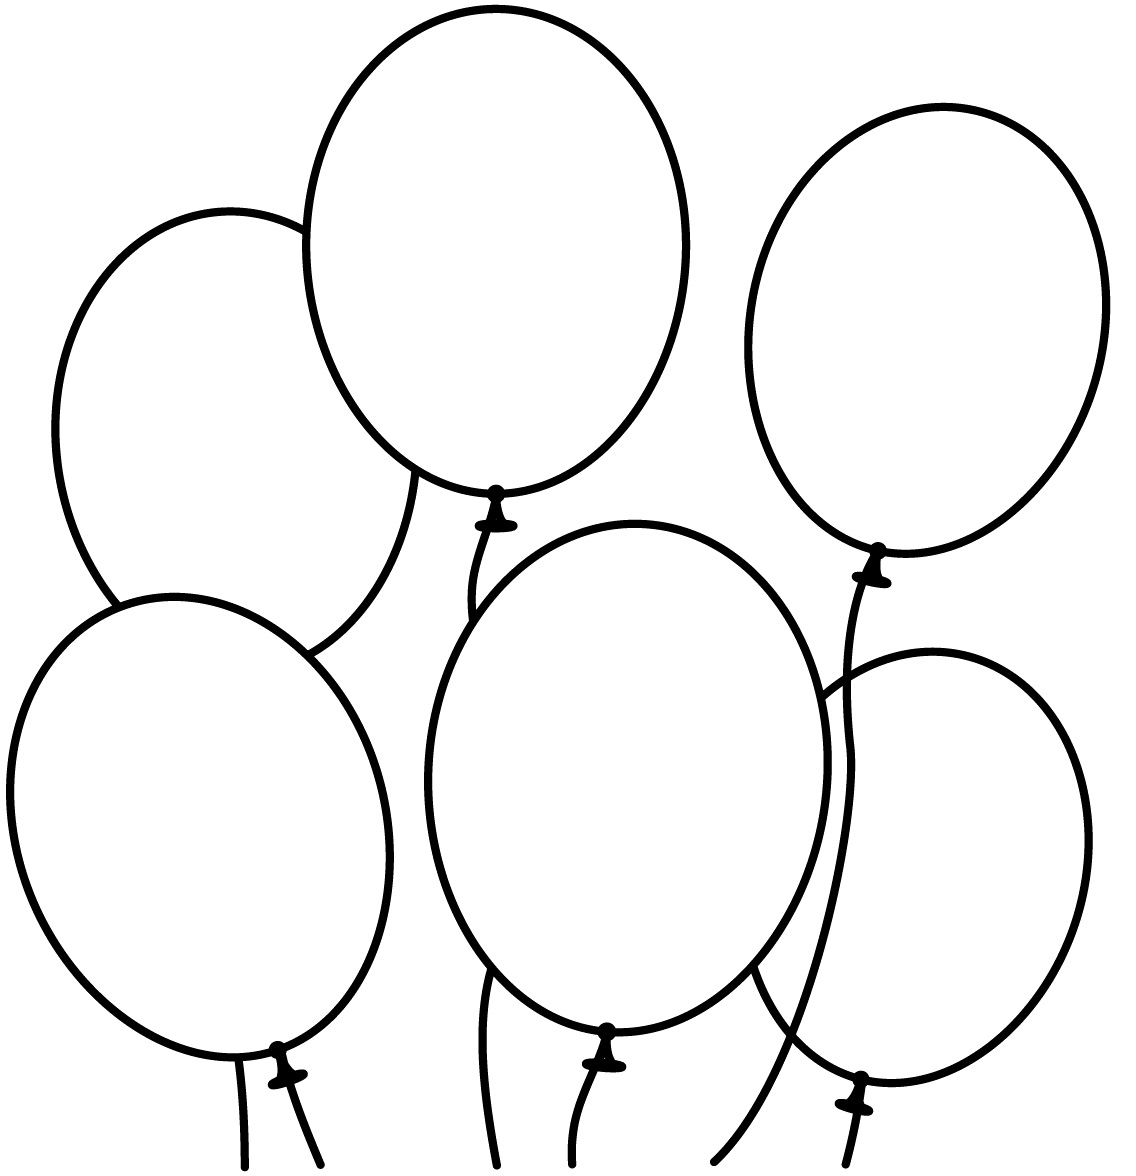 bunch-of-balloons-coloring-sheet-coloring-pages